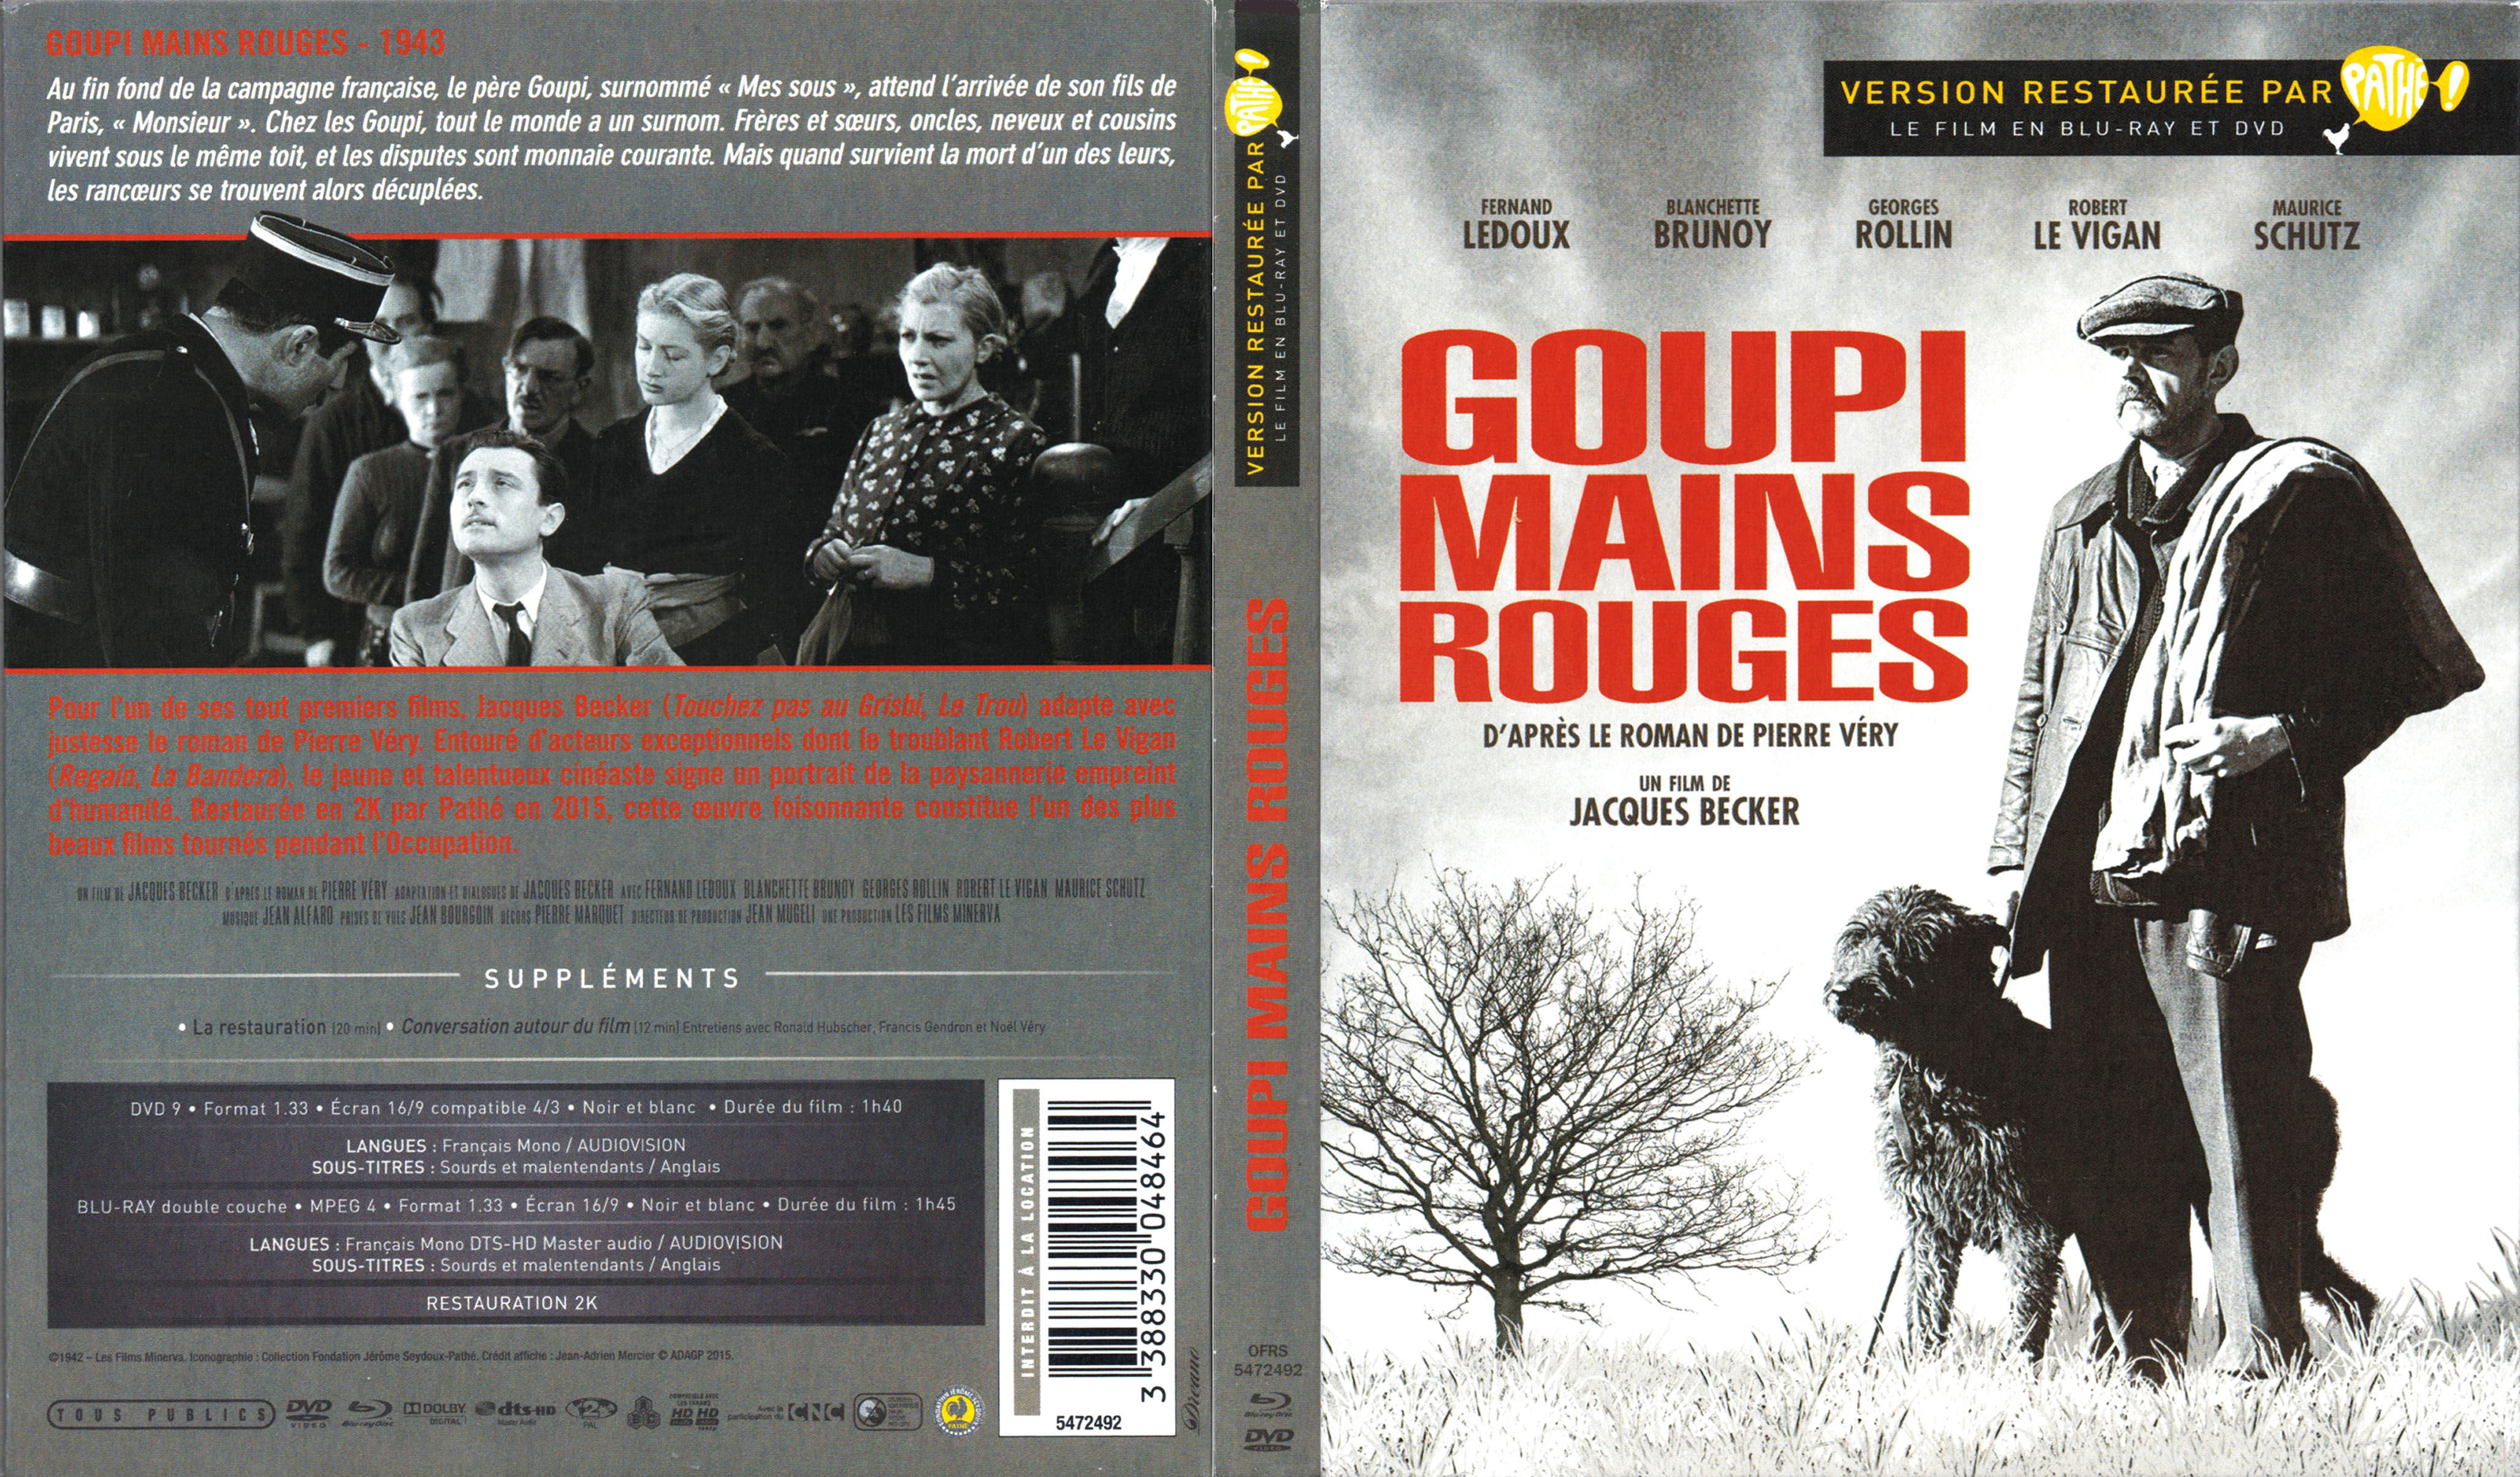 Jaquette DVD Goupi mains rouges (BLU-RAY)